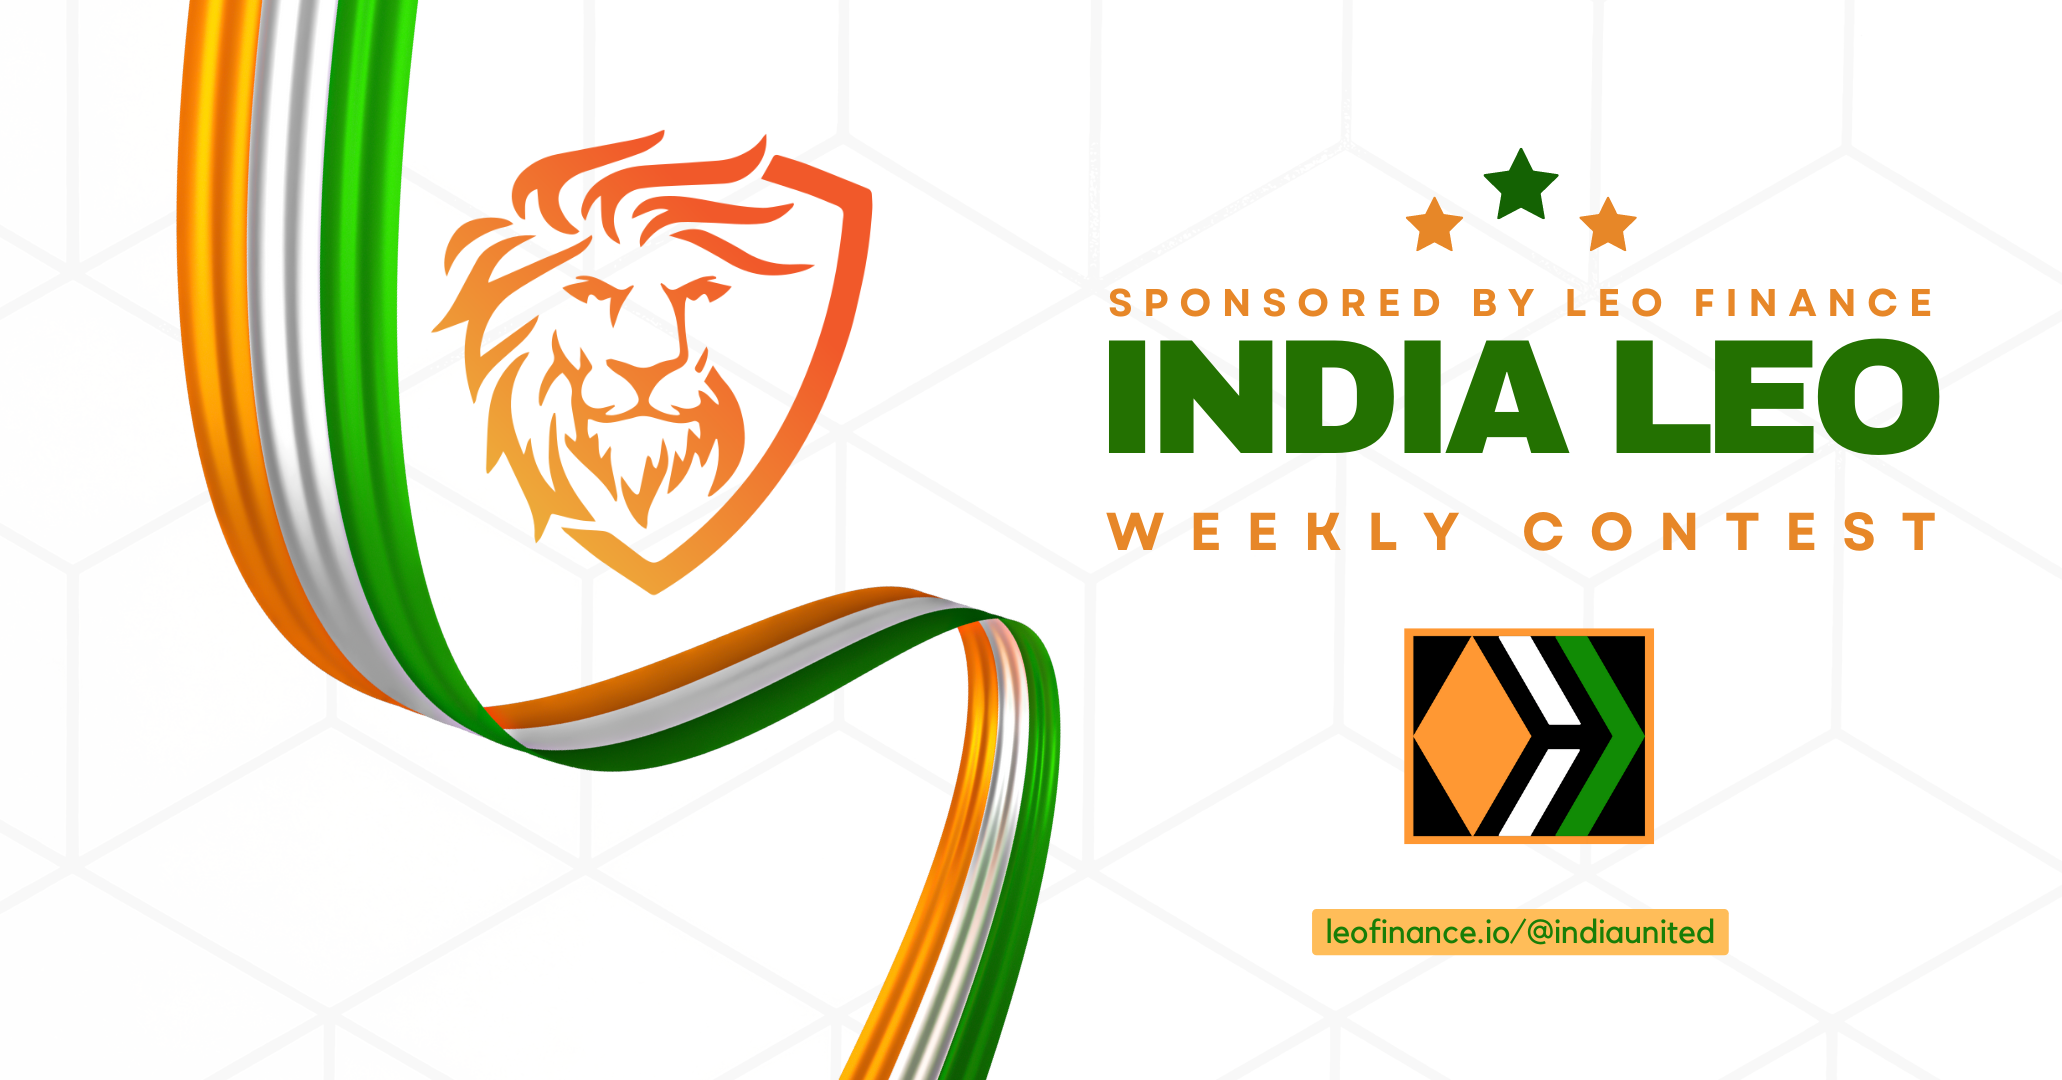 @indiaunited/india-leo-weekly-contest-announcing-winners-and-this-week-s-topic-4trxsf